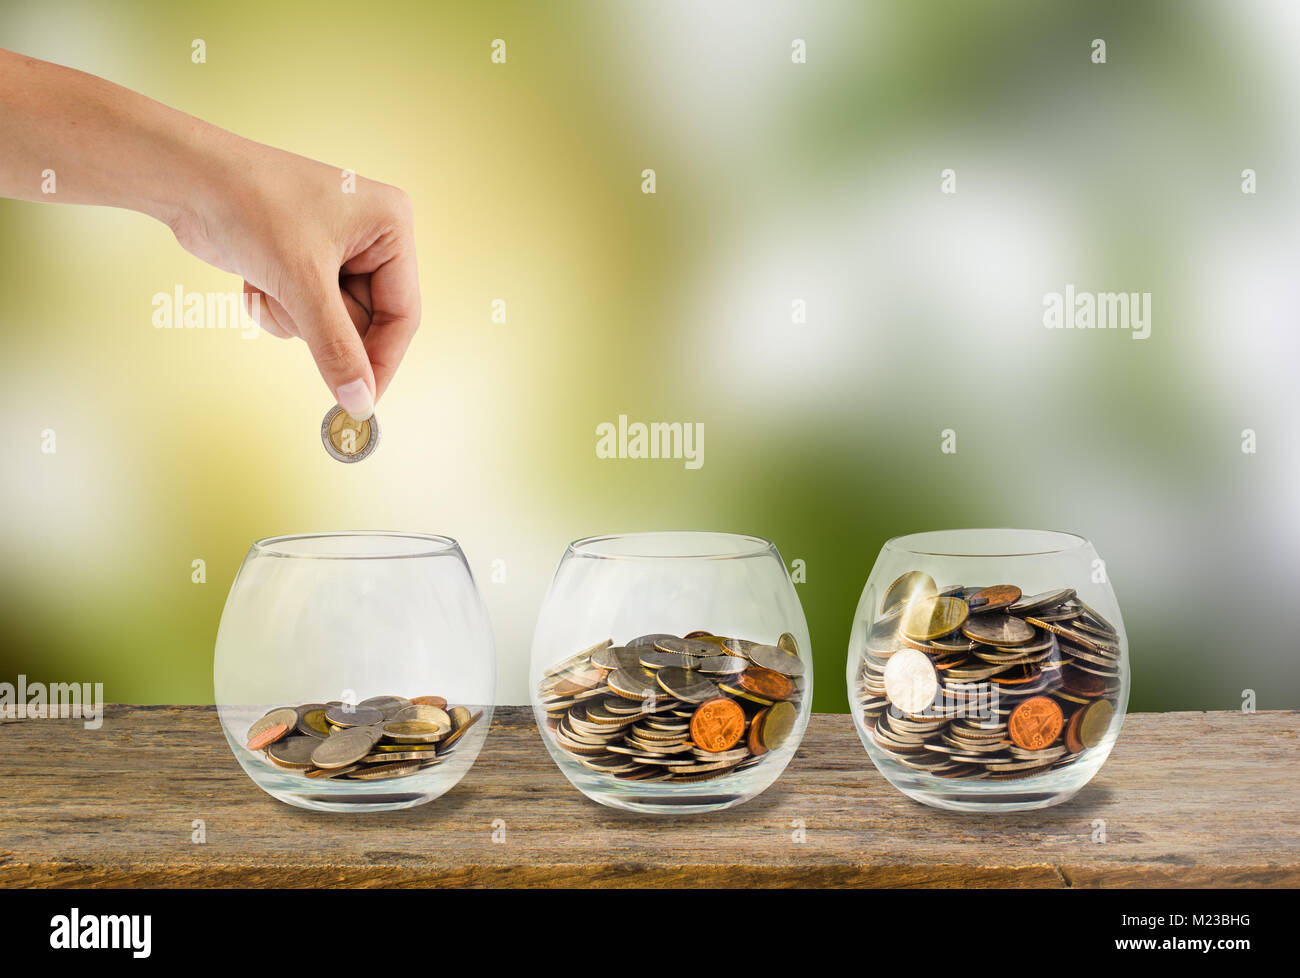 Saving money concept. Hand holding putting coins into three step clear glass bottle on wooden table with green blurred background and light. Conceptua Stock Photo